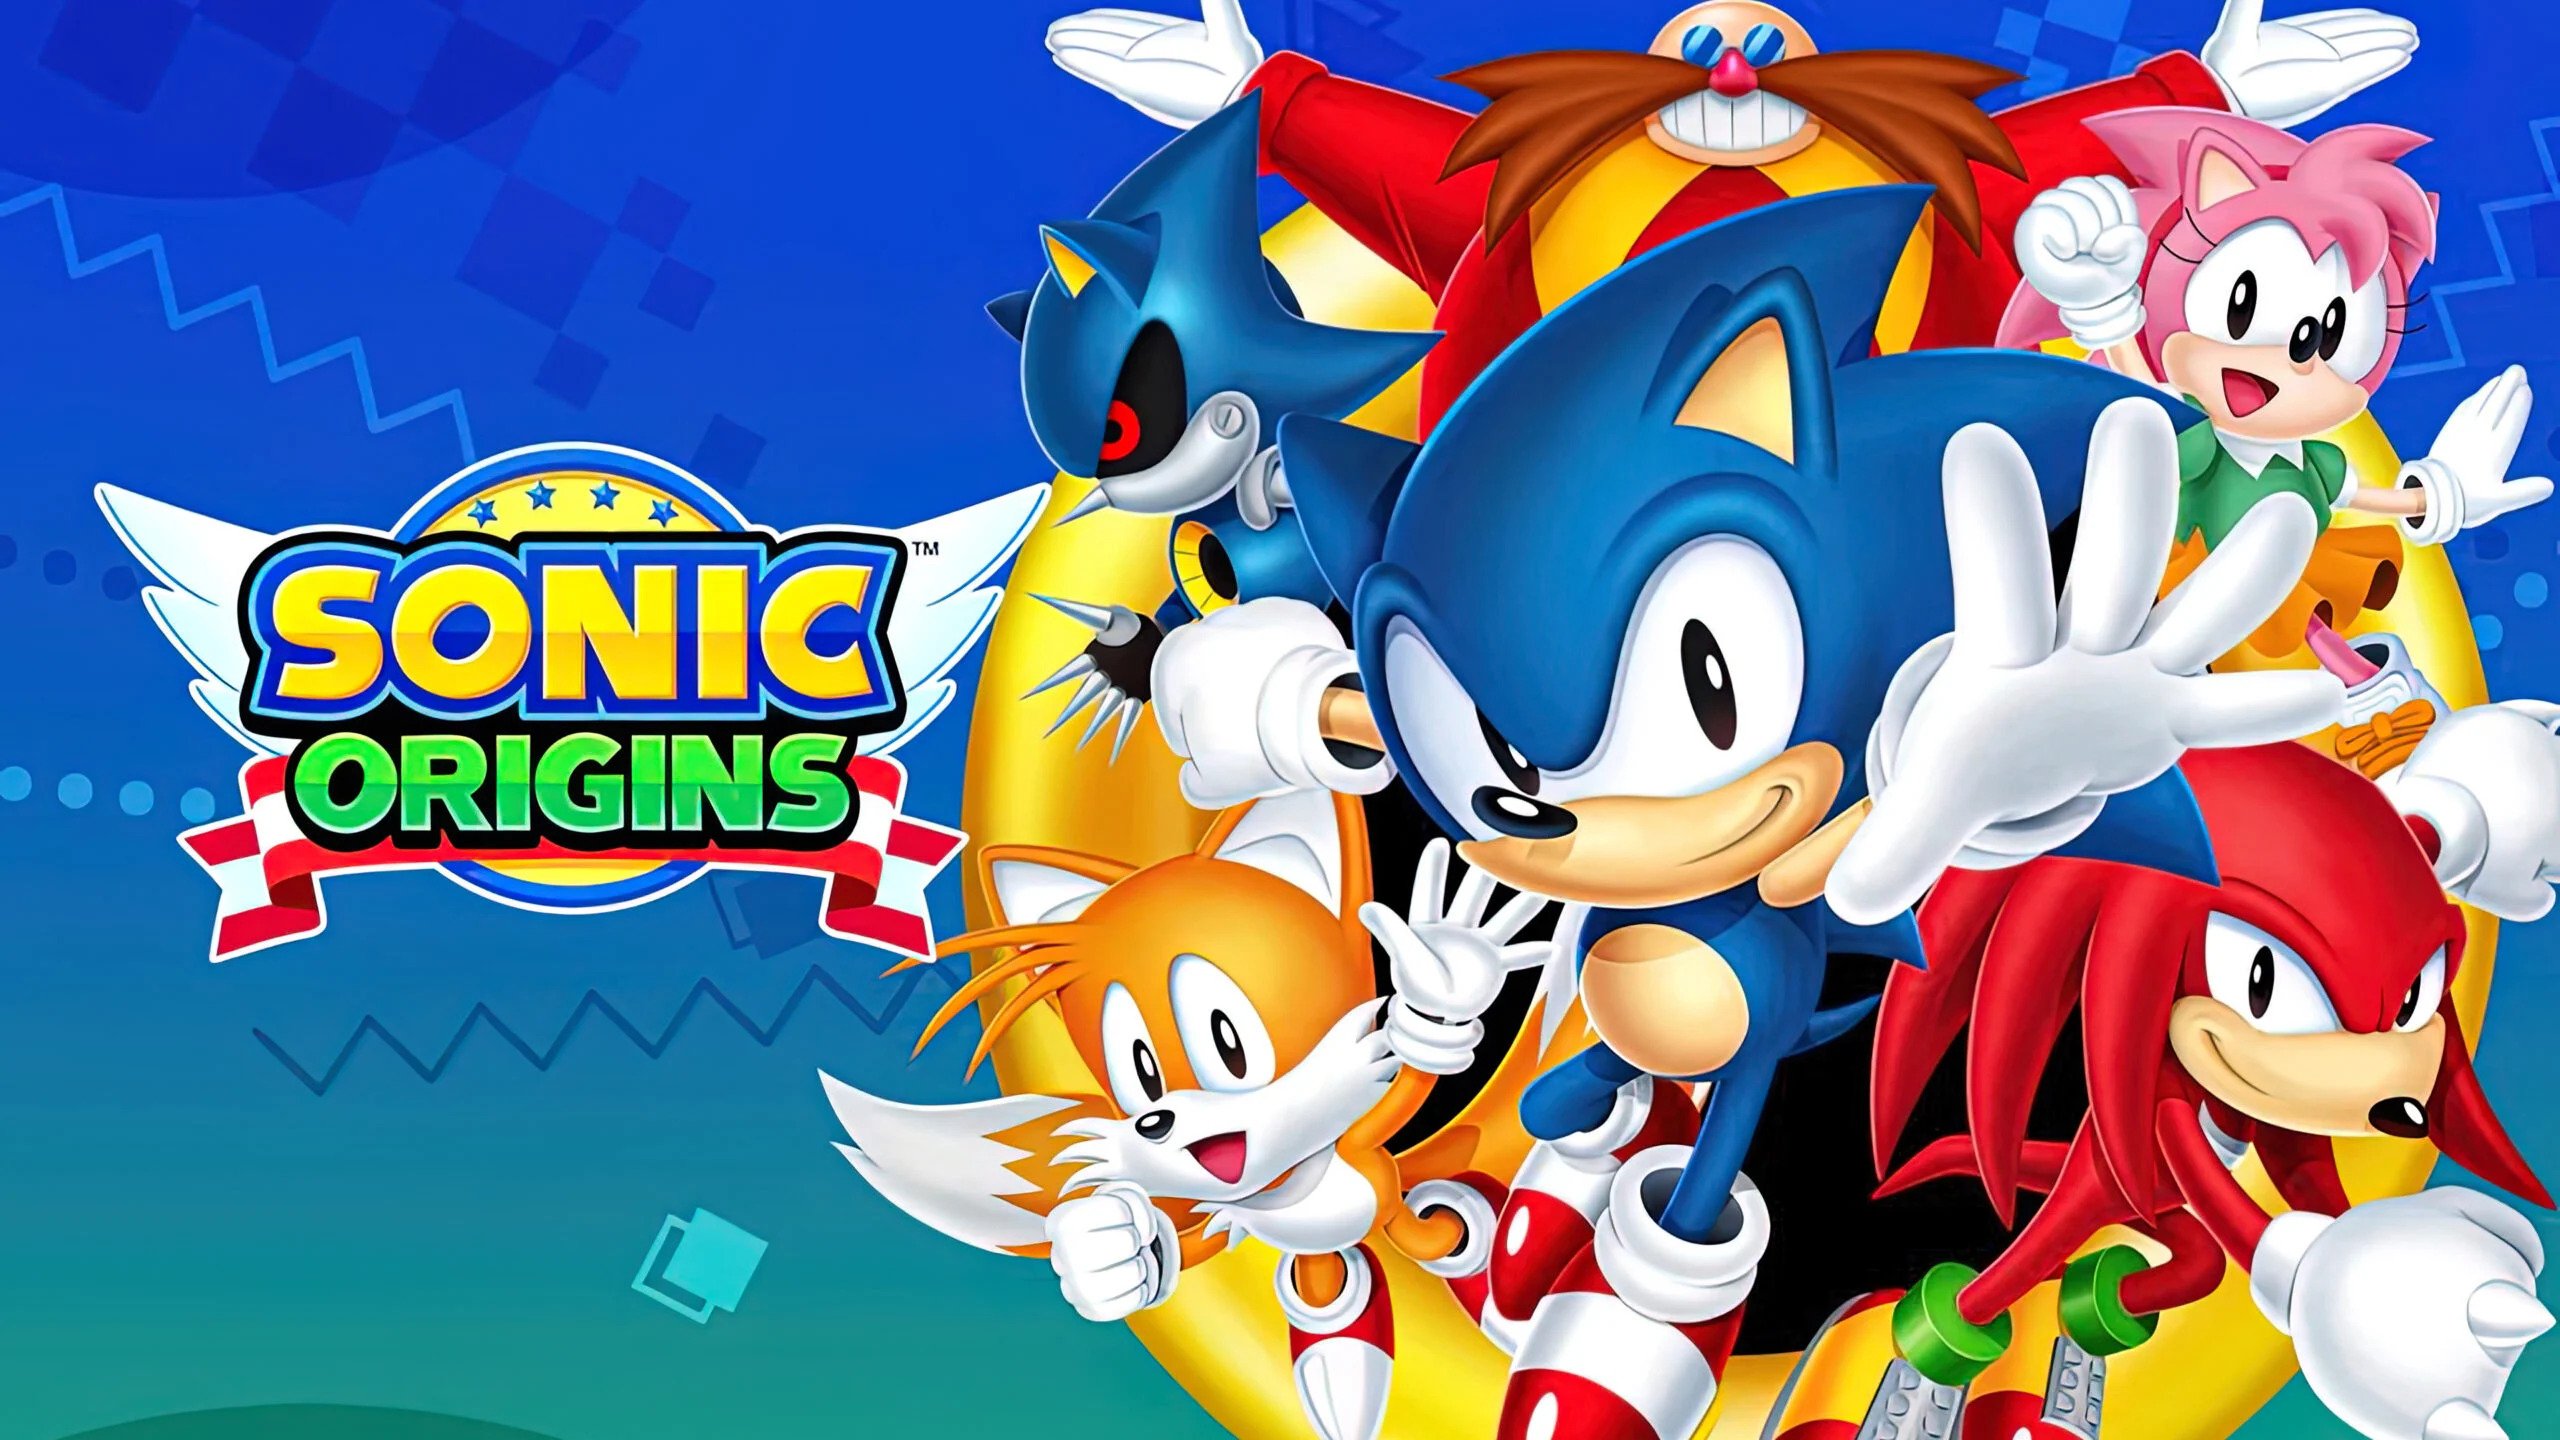 Sonic Origins Co-Dev Is Very Unhappy With The State Of The Game